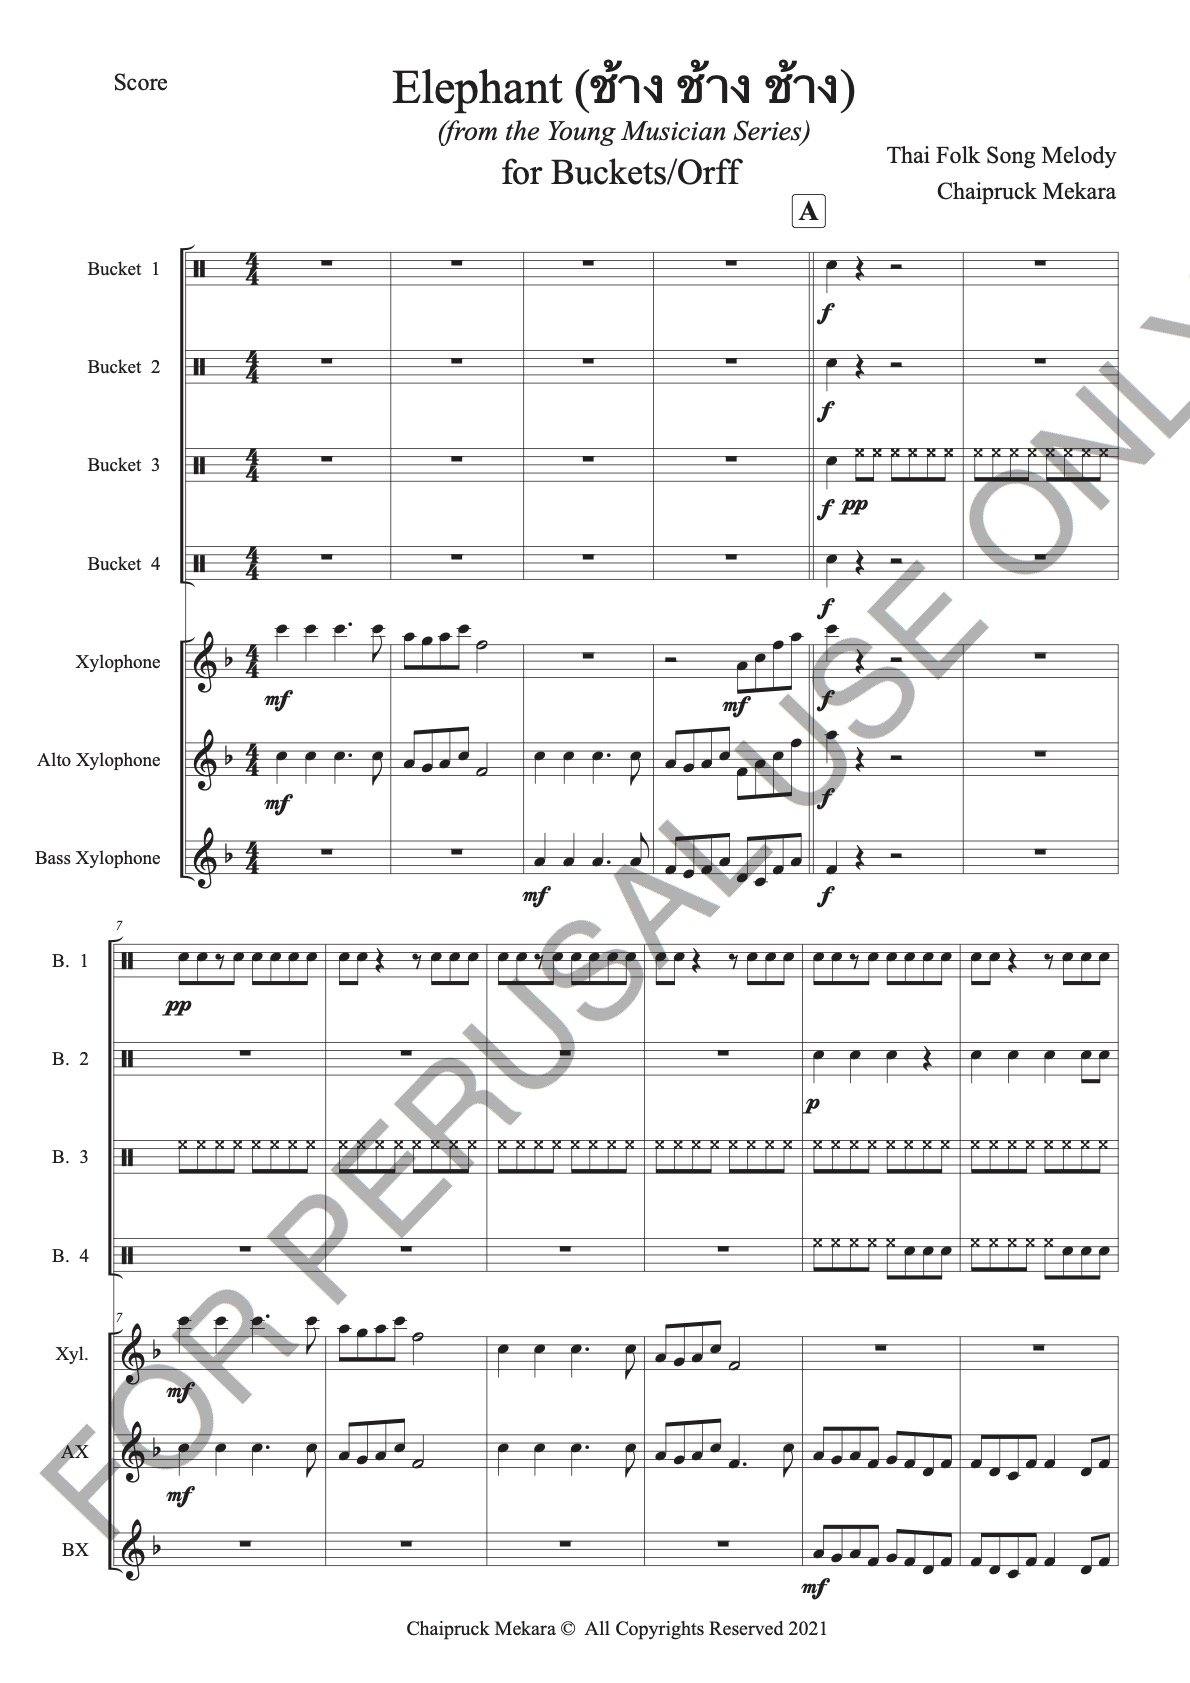 Bucket Drums and Orff Orchestra - Elephant (ช้าง ช้าง ช้าง) (score+parts) - ChaipruckMekara